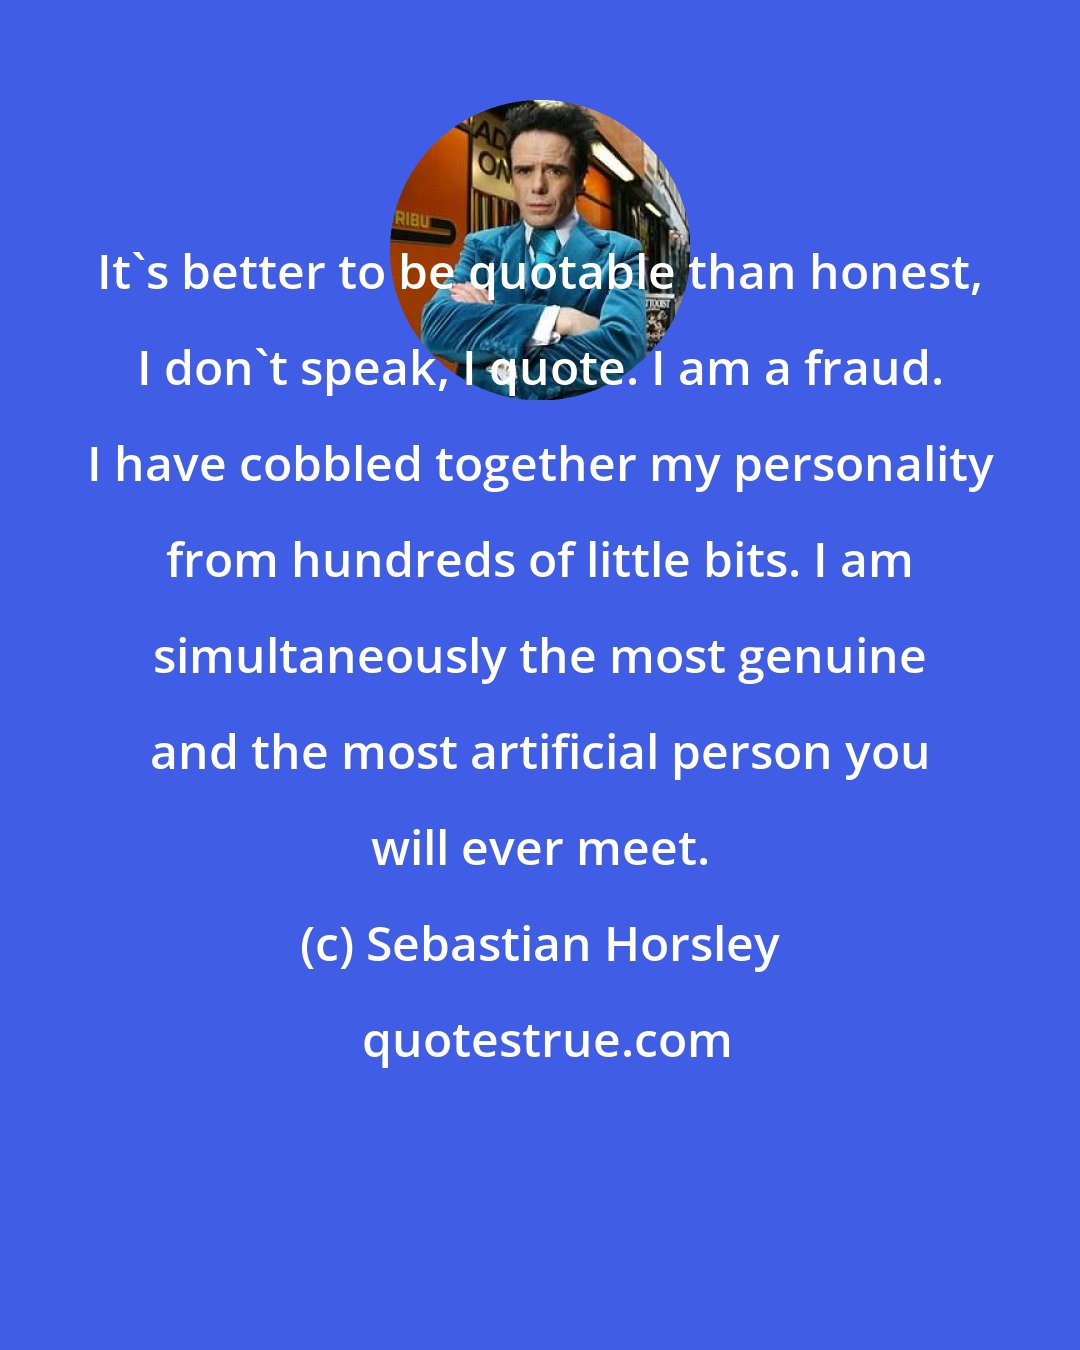 Sebastian Horsley: It's better to be quotable than honest, I don't speak, I quote. I am a fraud. I have cobbled together my personality from hundreds of little bits. I am simultaneously the most genuine and the most artificial person you will ever meet.